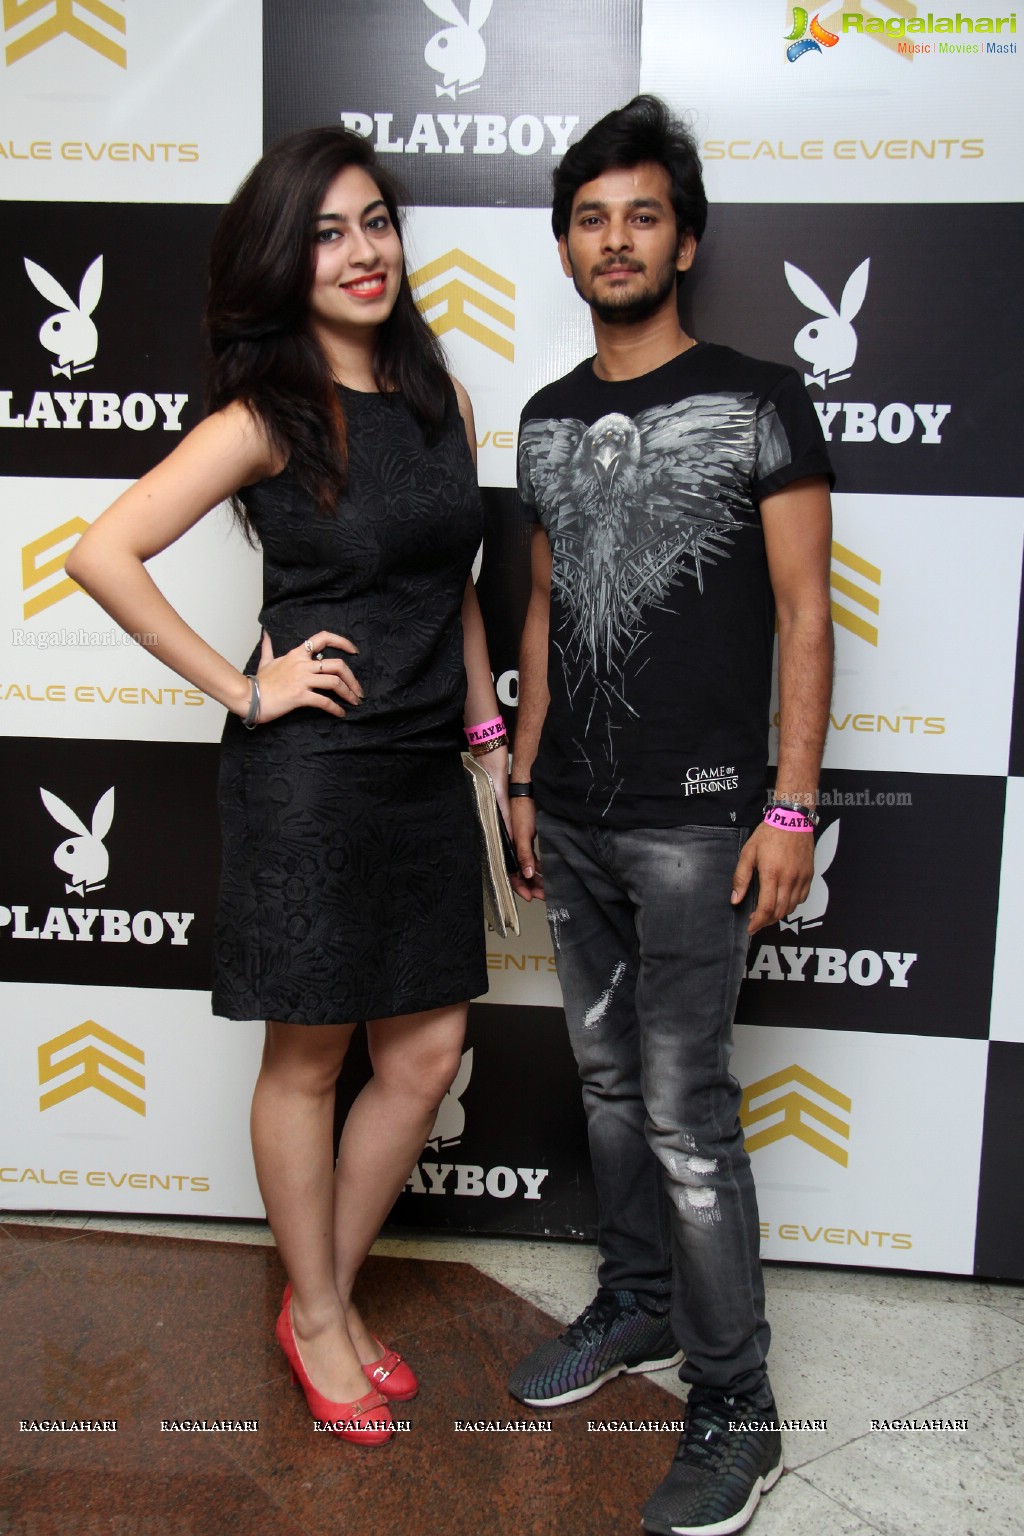 Playboy Club with DJ Amour and Resident DJ Yudi - Event by Scale Events